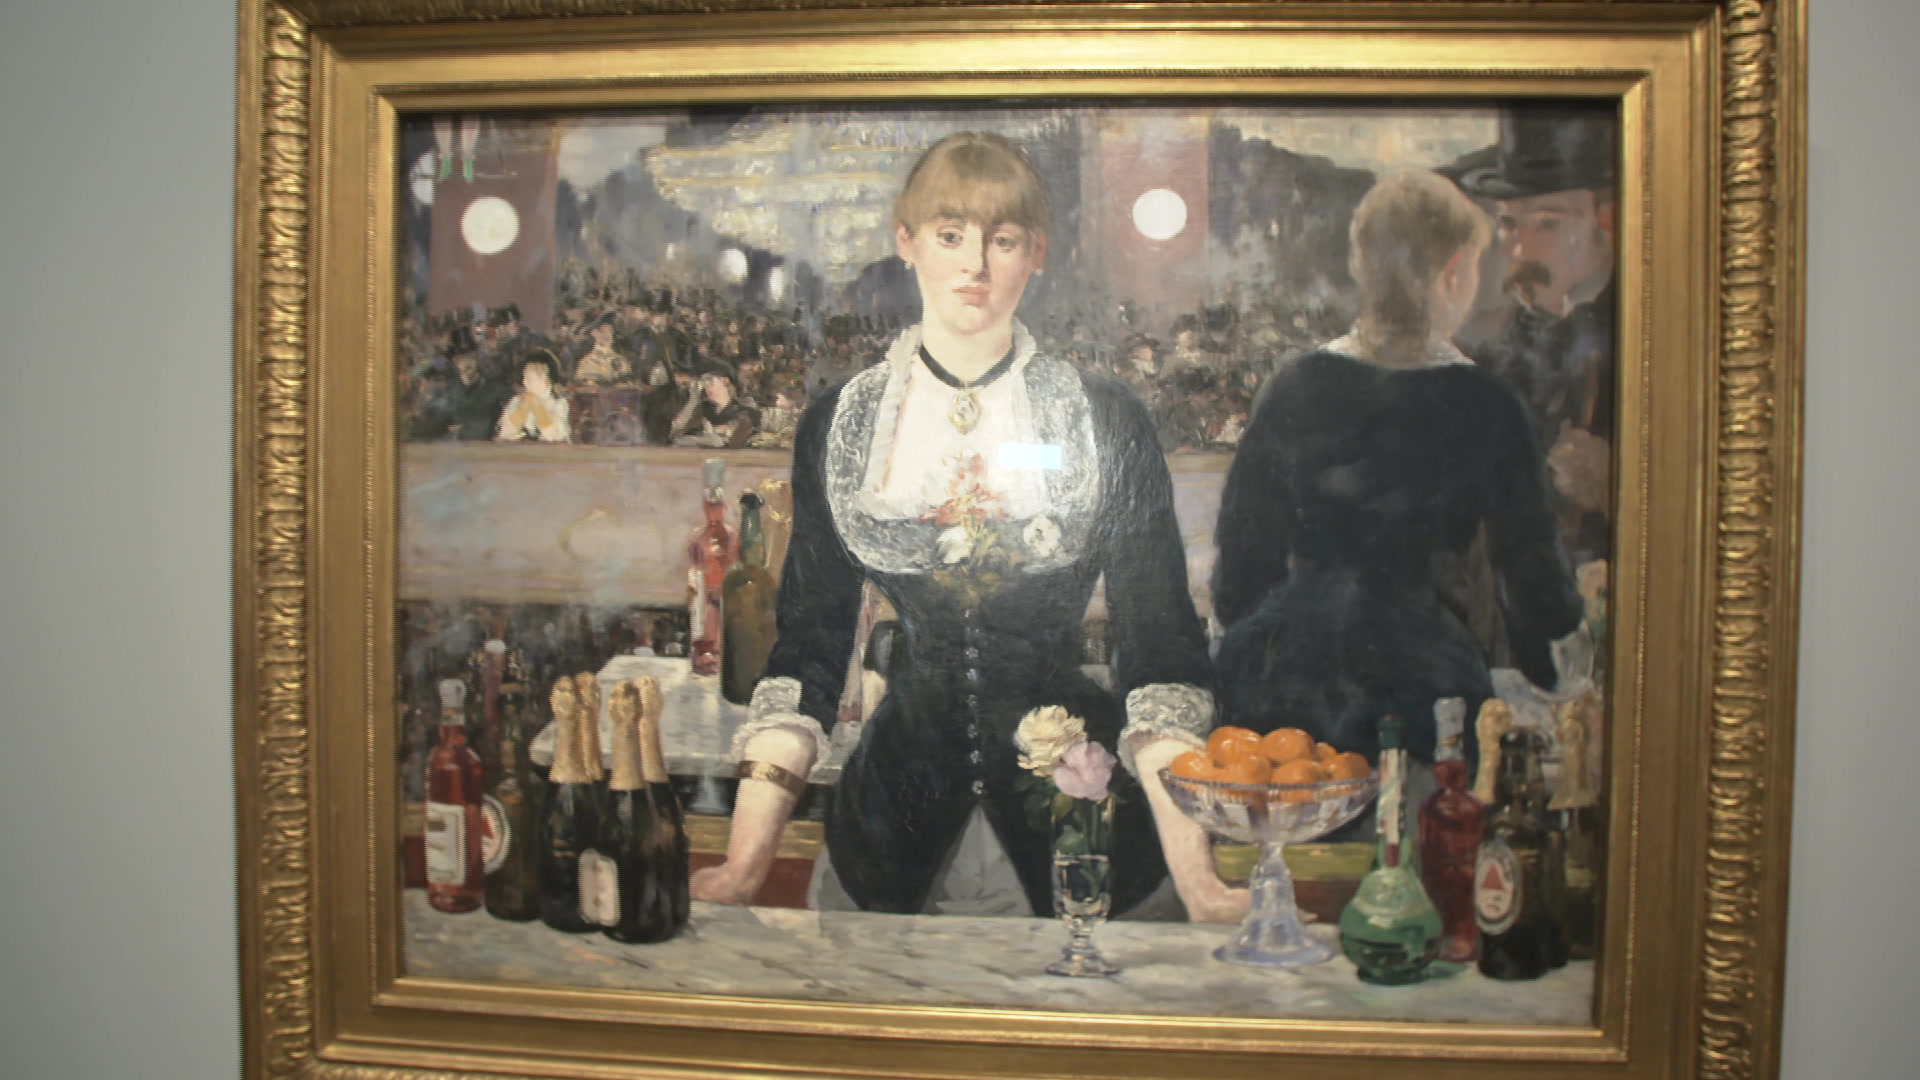 The Courtauld collection - the party of Impressionism